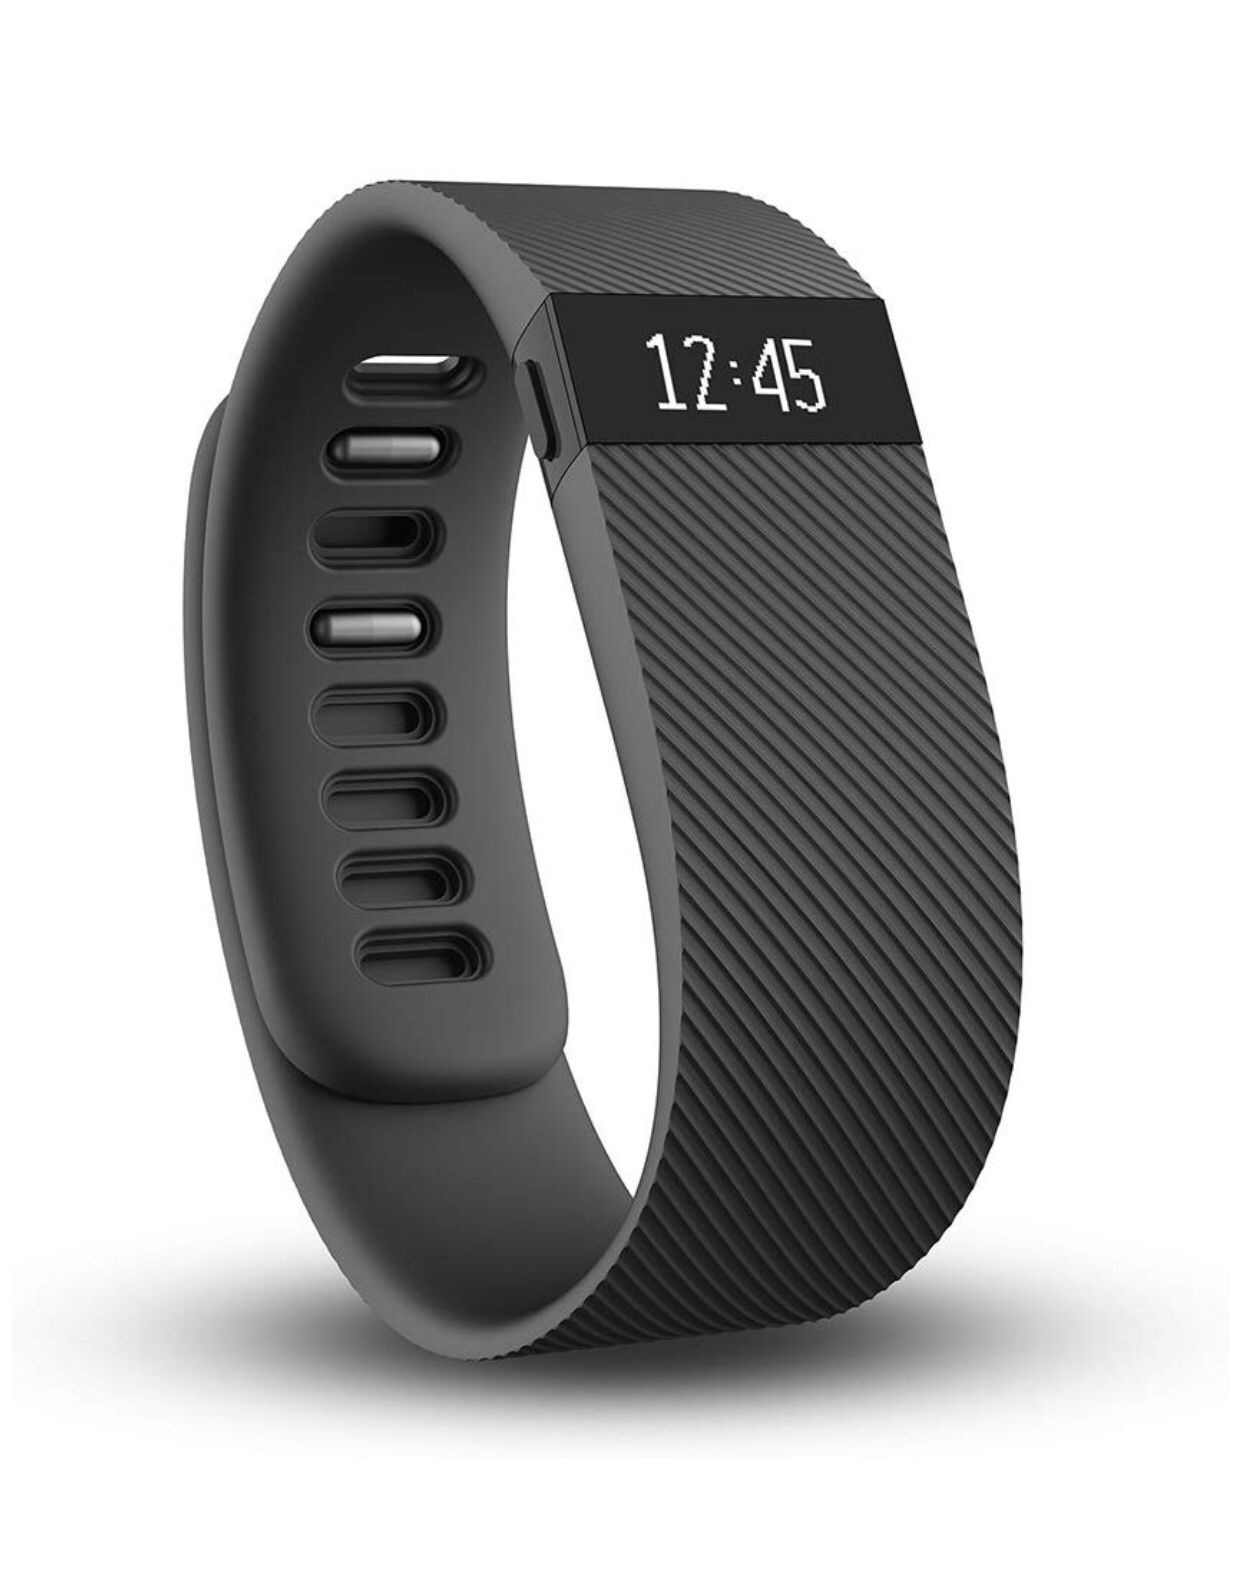 Fitbit charge HR activity and fitness tracker smart watch